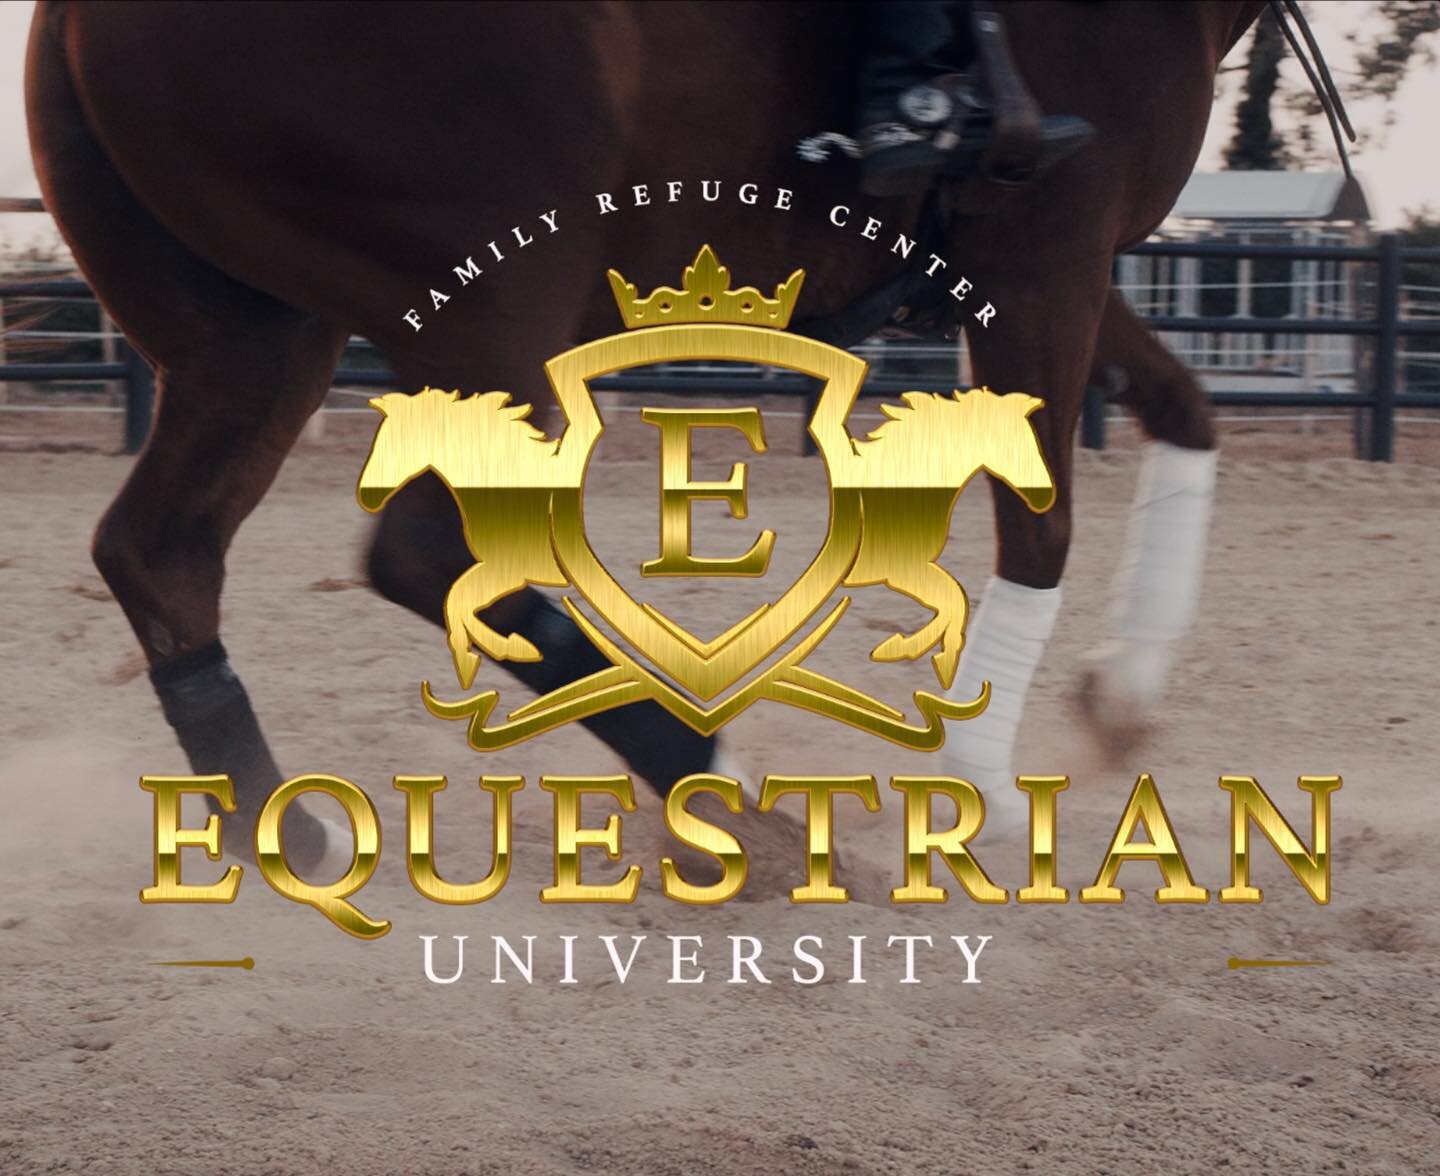 SUNDAY! This Sunday is the groundbreaking ceremony for our brand new equestrian center!

Swipe left for details ➡️